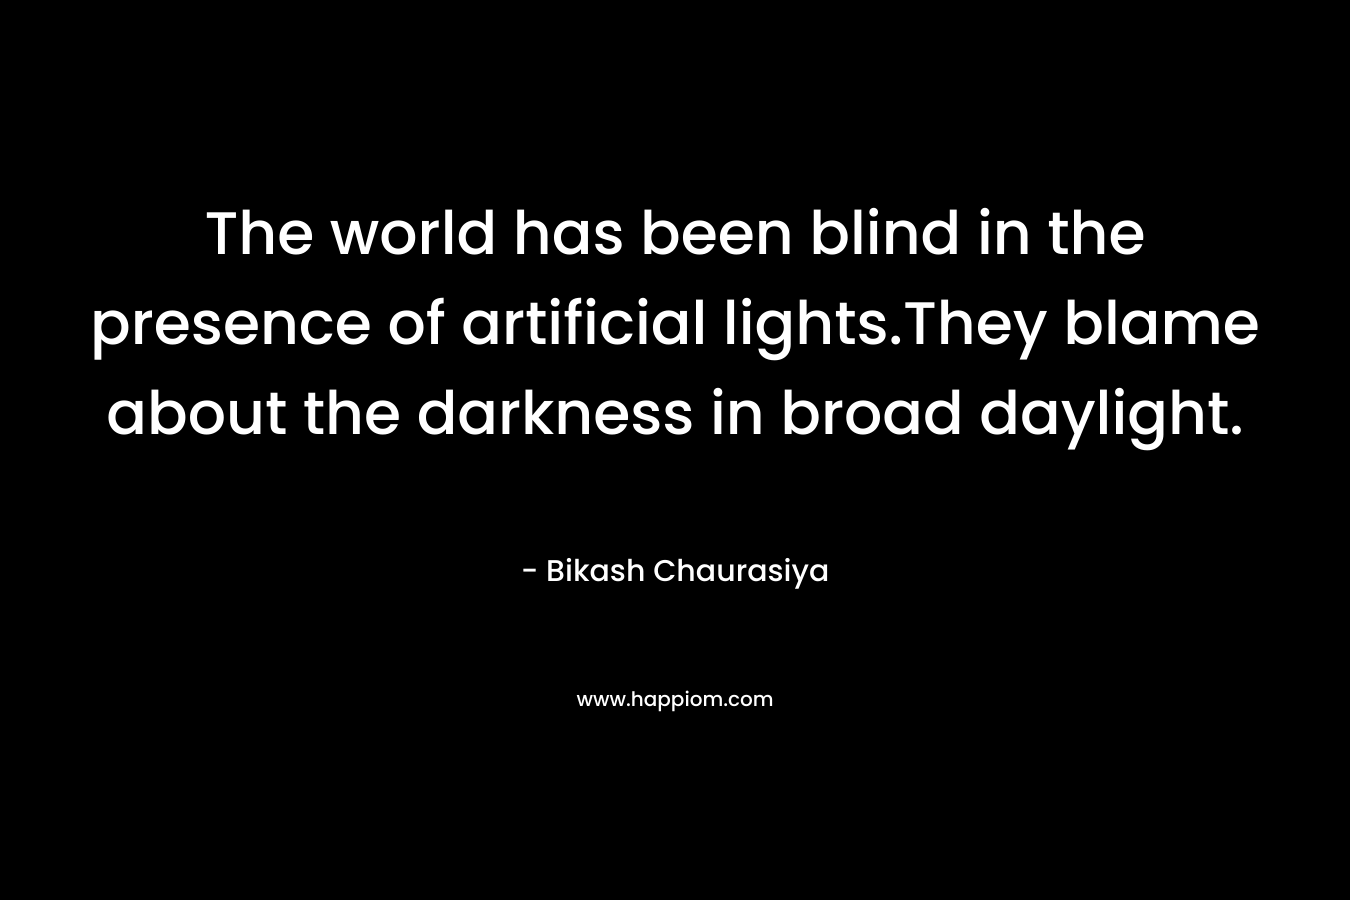 The world has been blind in the presence of artificial lights.They blame about the darkness in broad daylight.